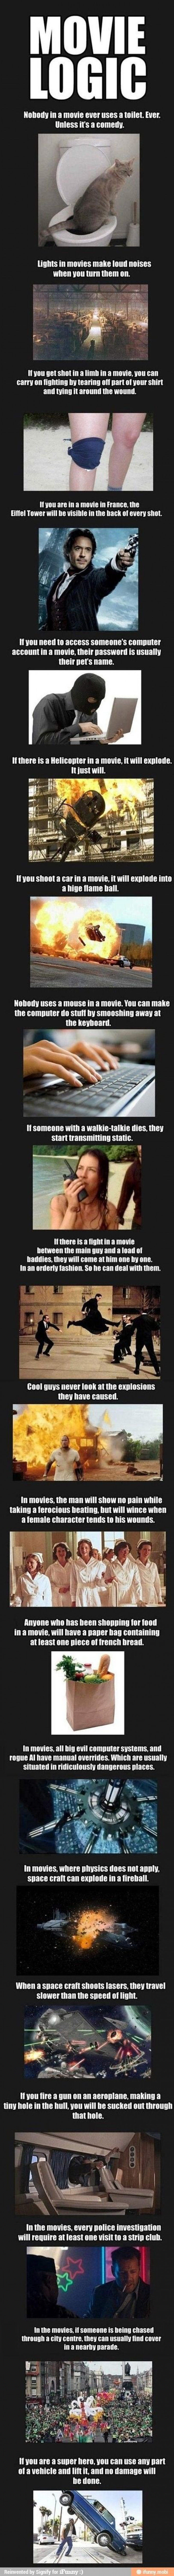 Funny Movie Logic That You Only See In Movies